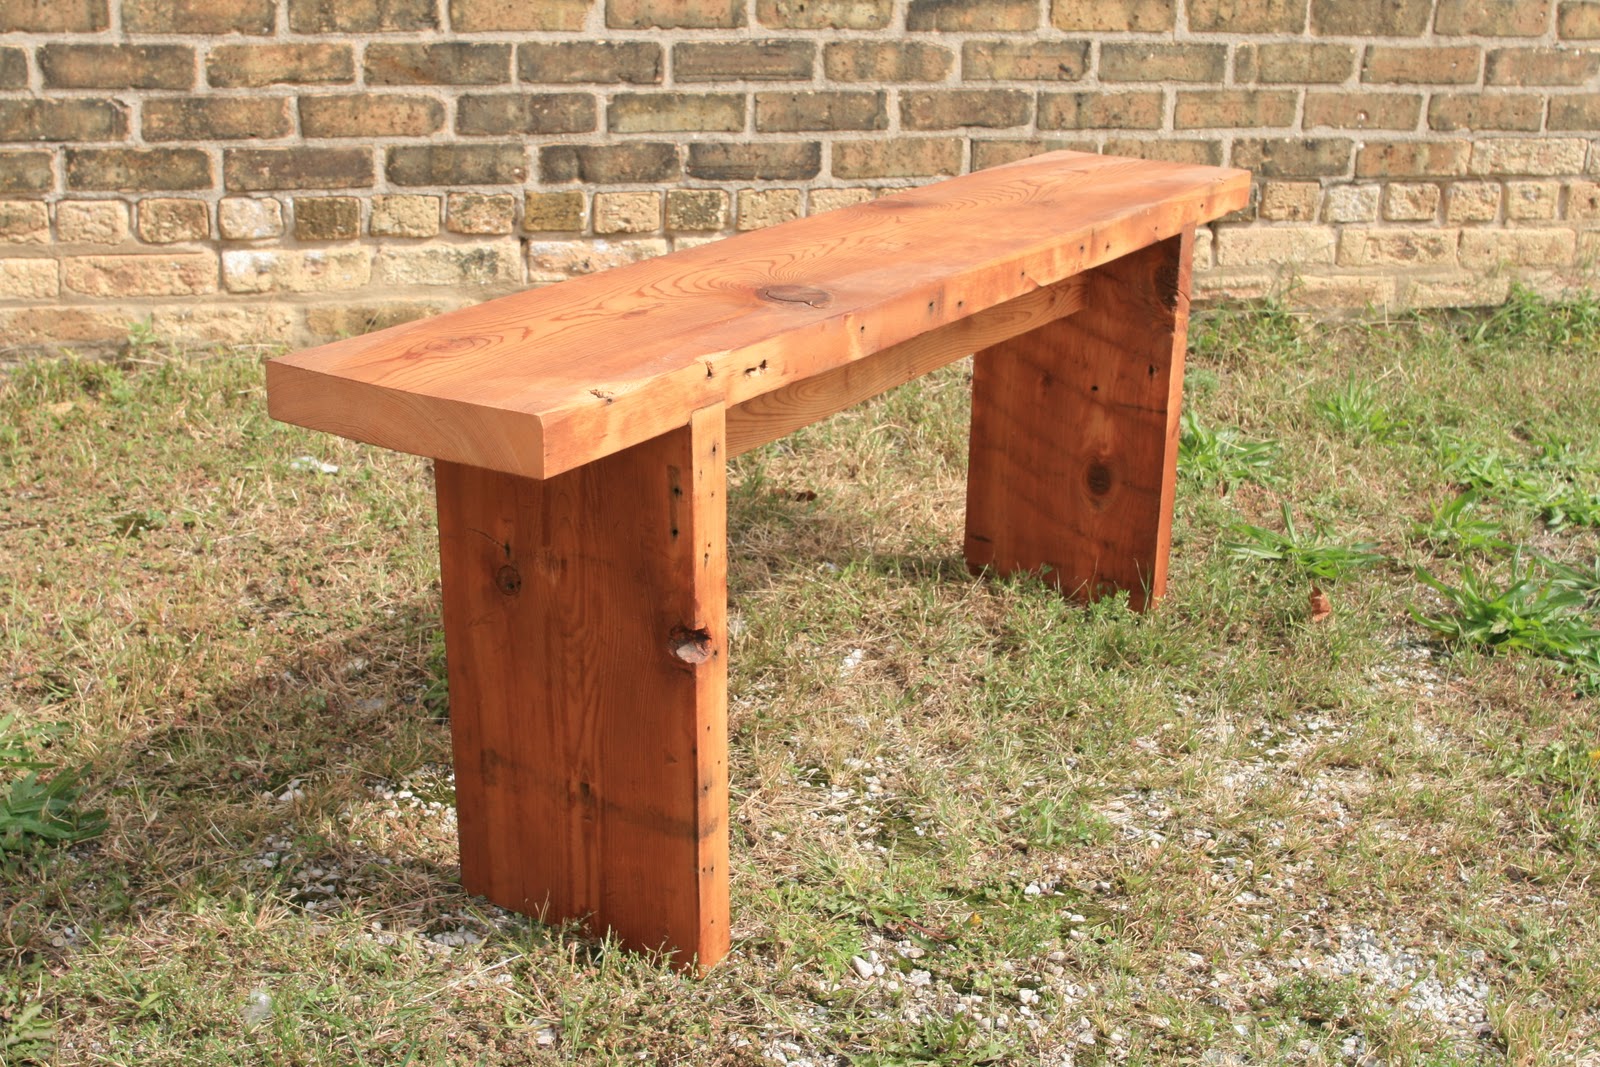 Build a Simple Wood Bench